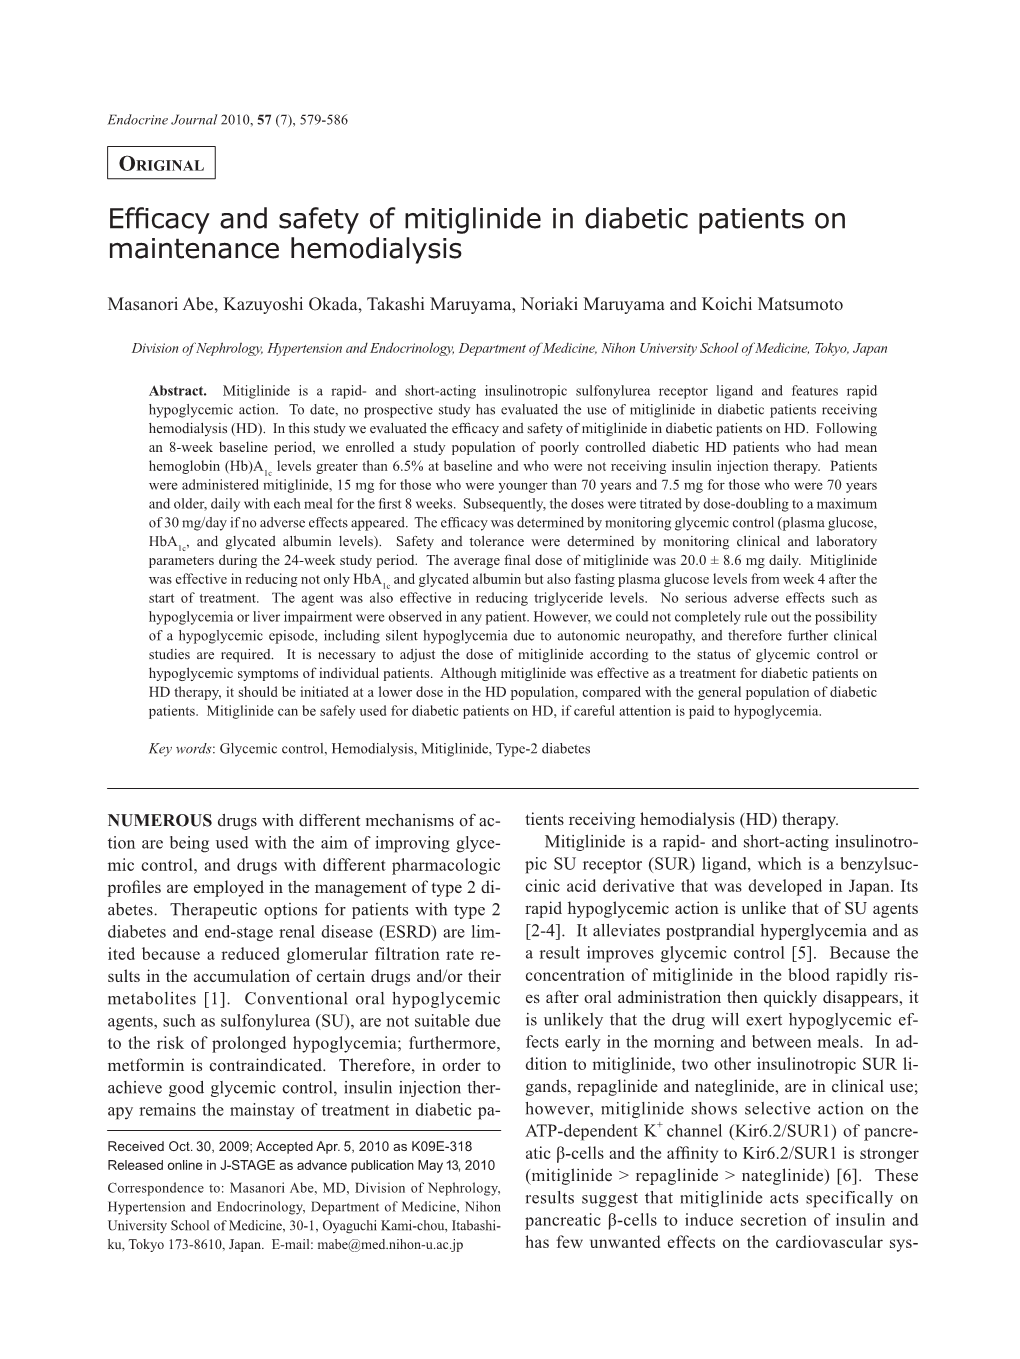 Efficacy and Safety of Mitiglinide in Diabetic Patients on Maintenance Hemodialysis